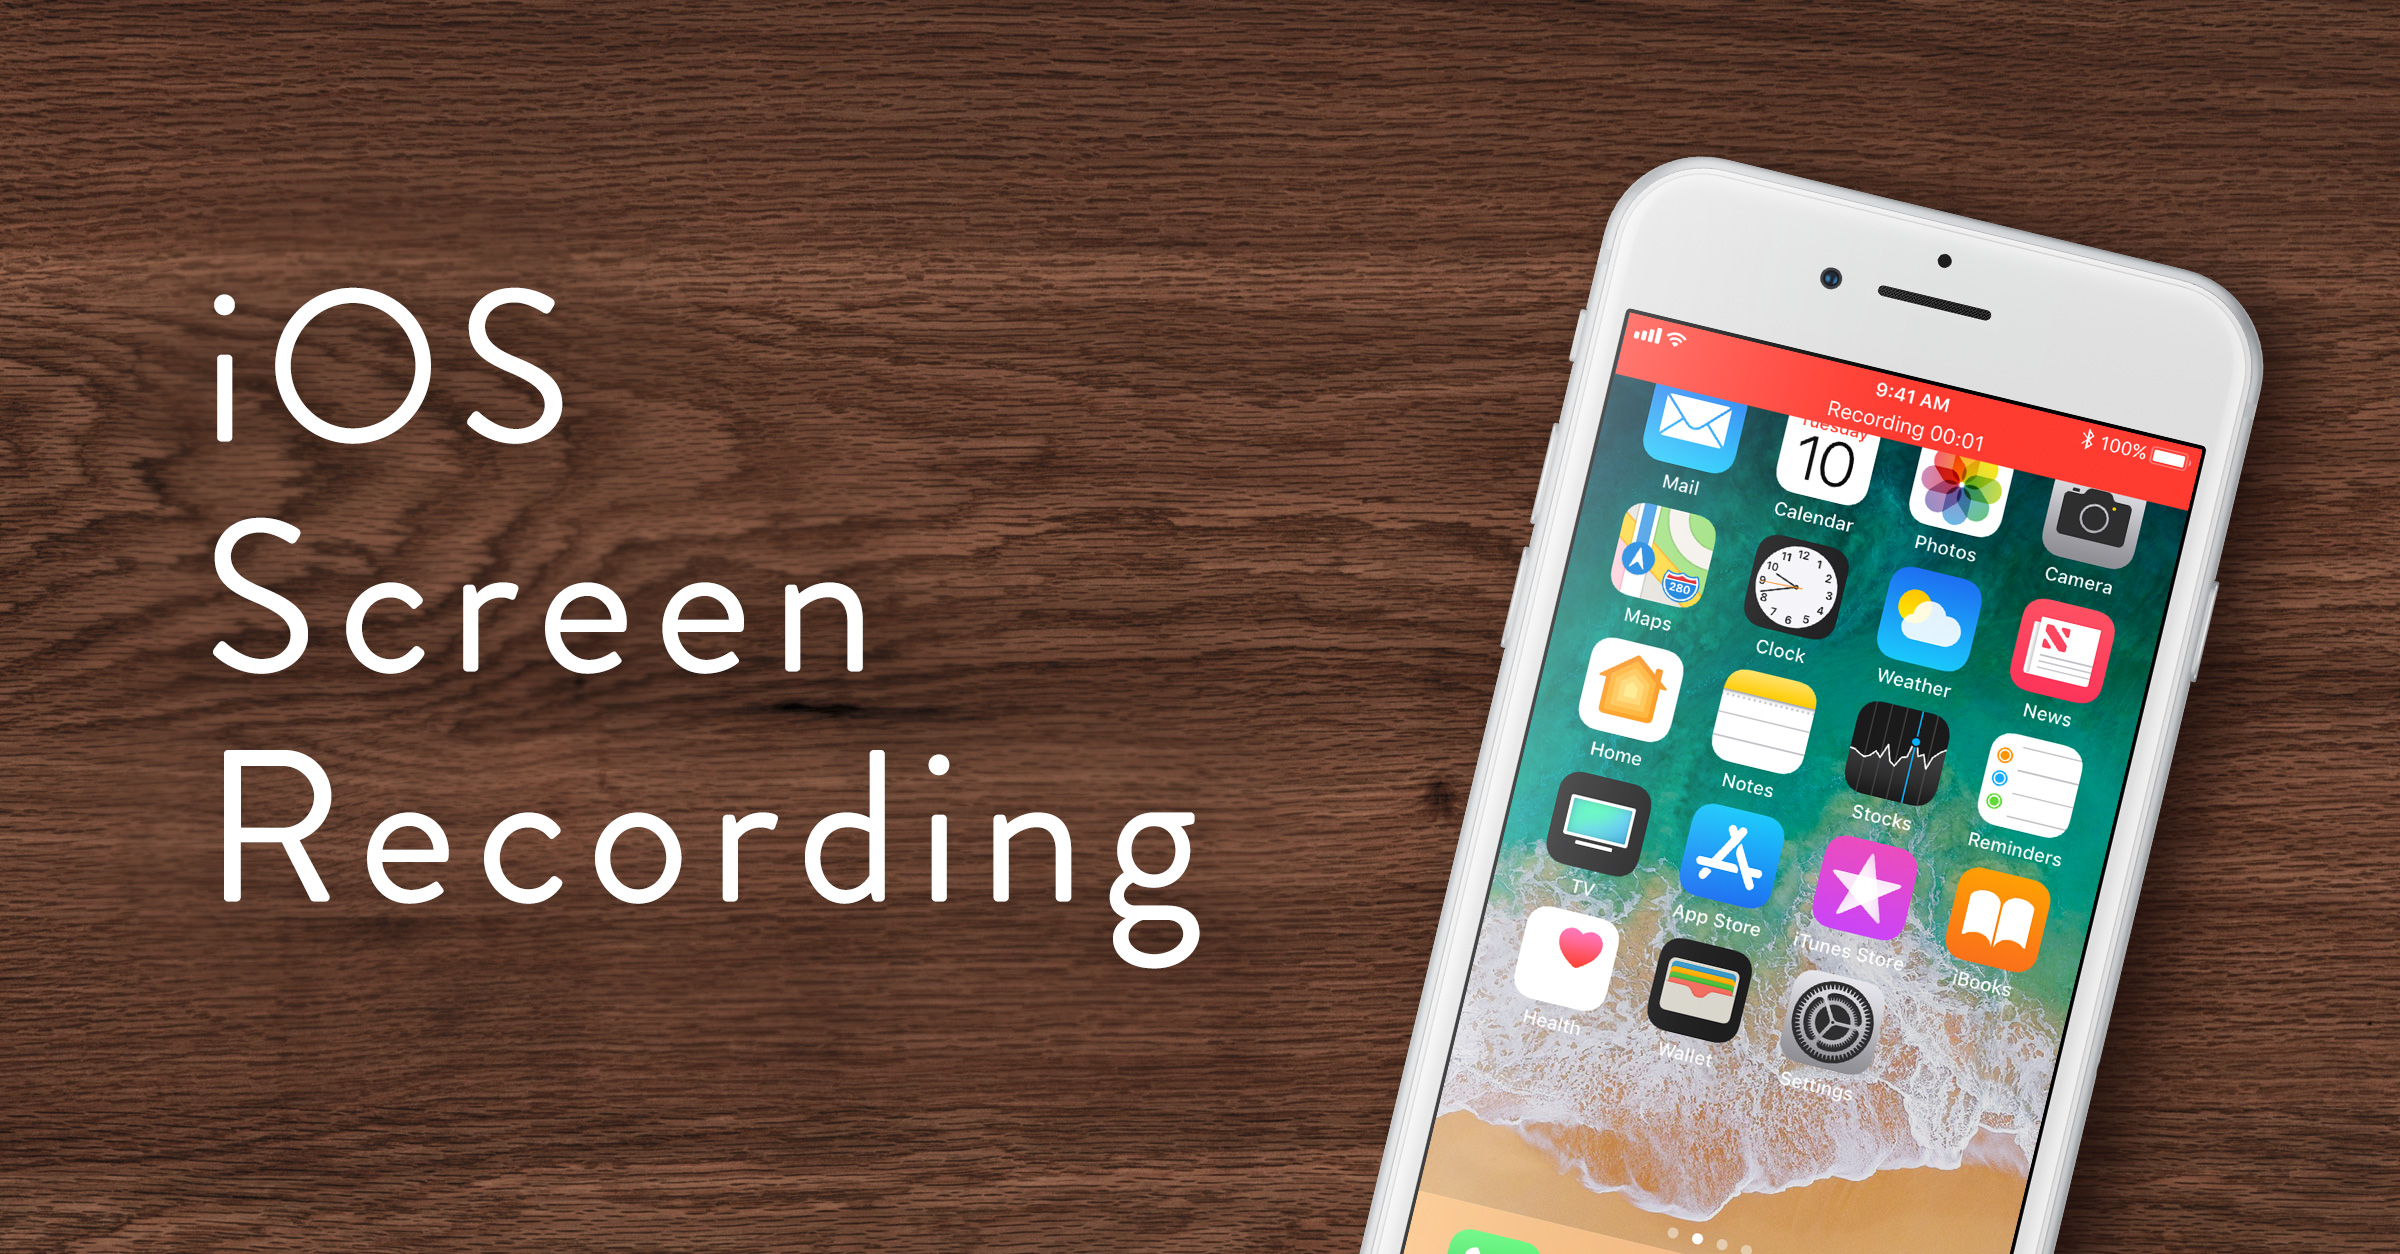 How To Use Screen Recording On Your Iphone Ipad Or Ipod Touch - how to record roblox on ipad